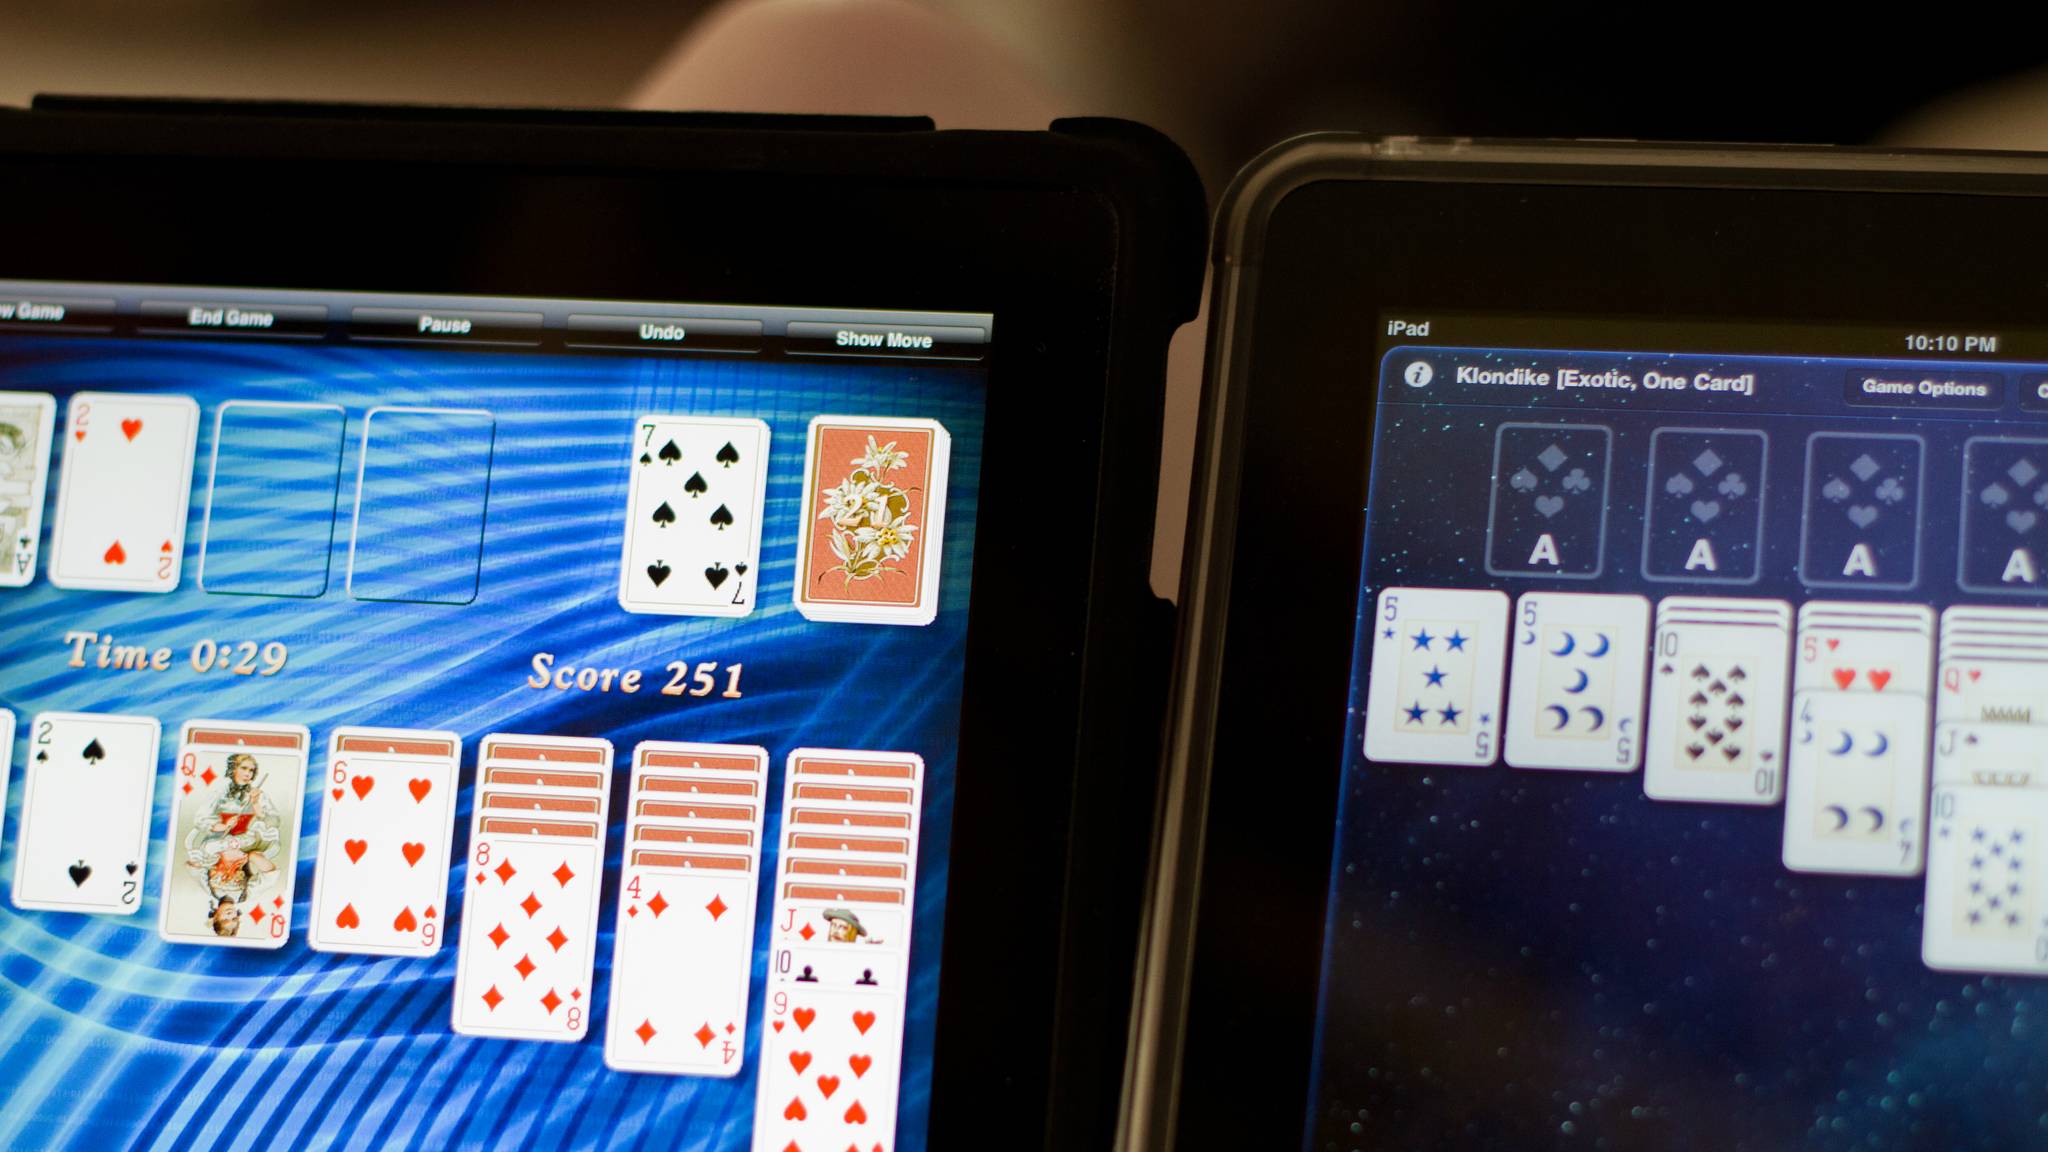 Microsoft brings Solitaire back to Windows